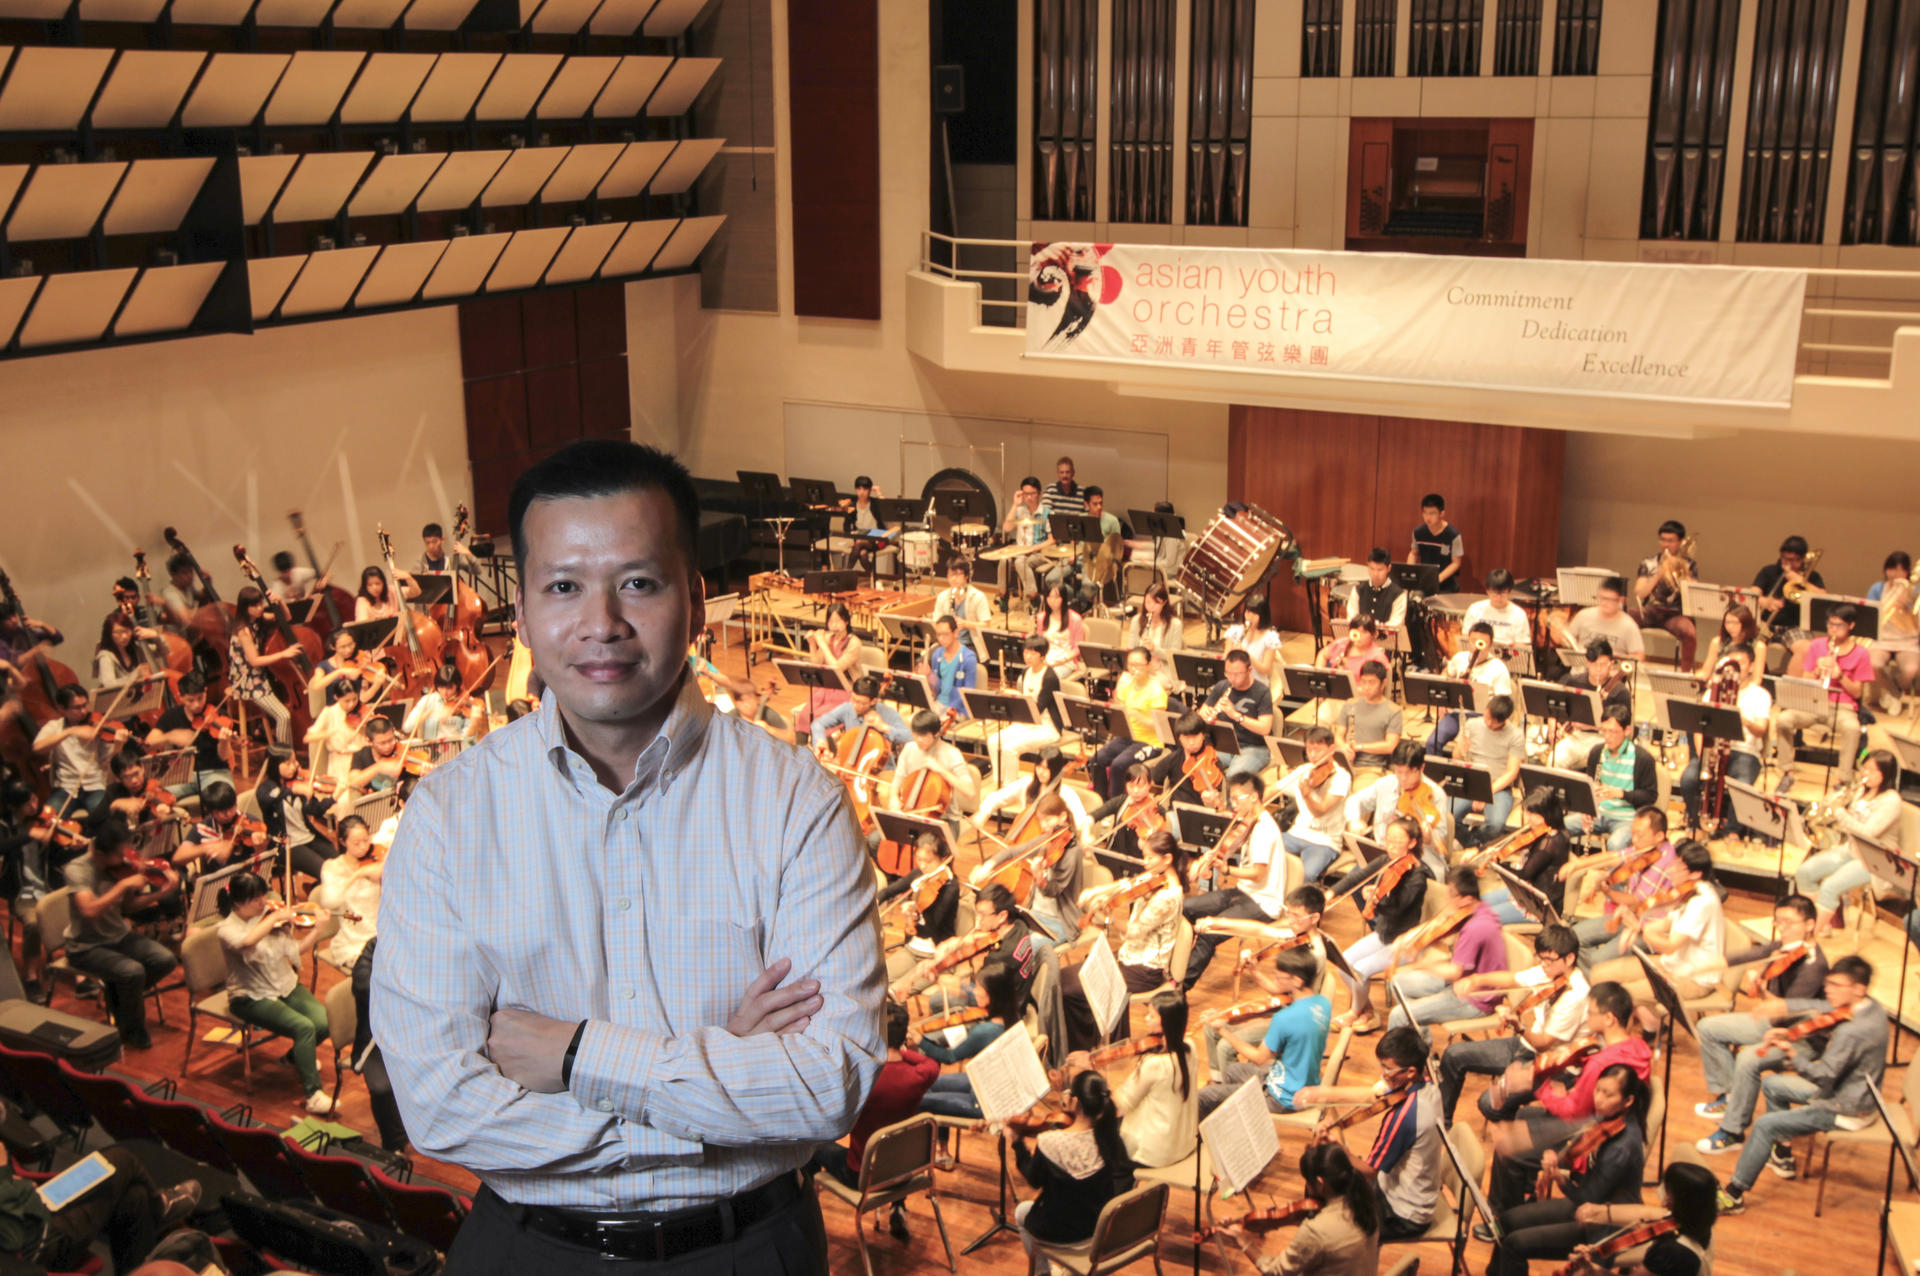 Keith Lau with the Asian Youth Orchestra. Photos: Bruce Yan